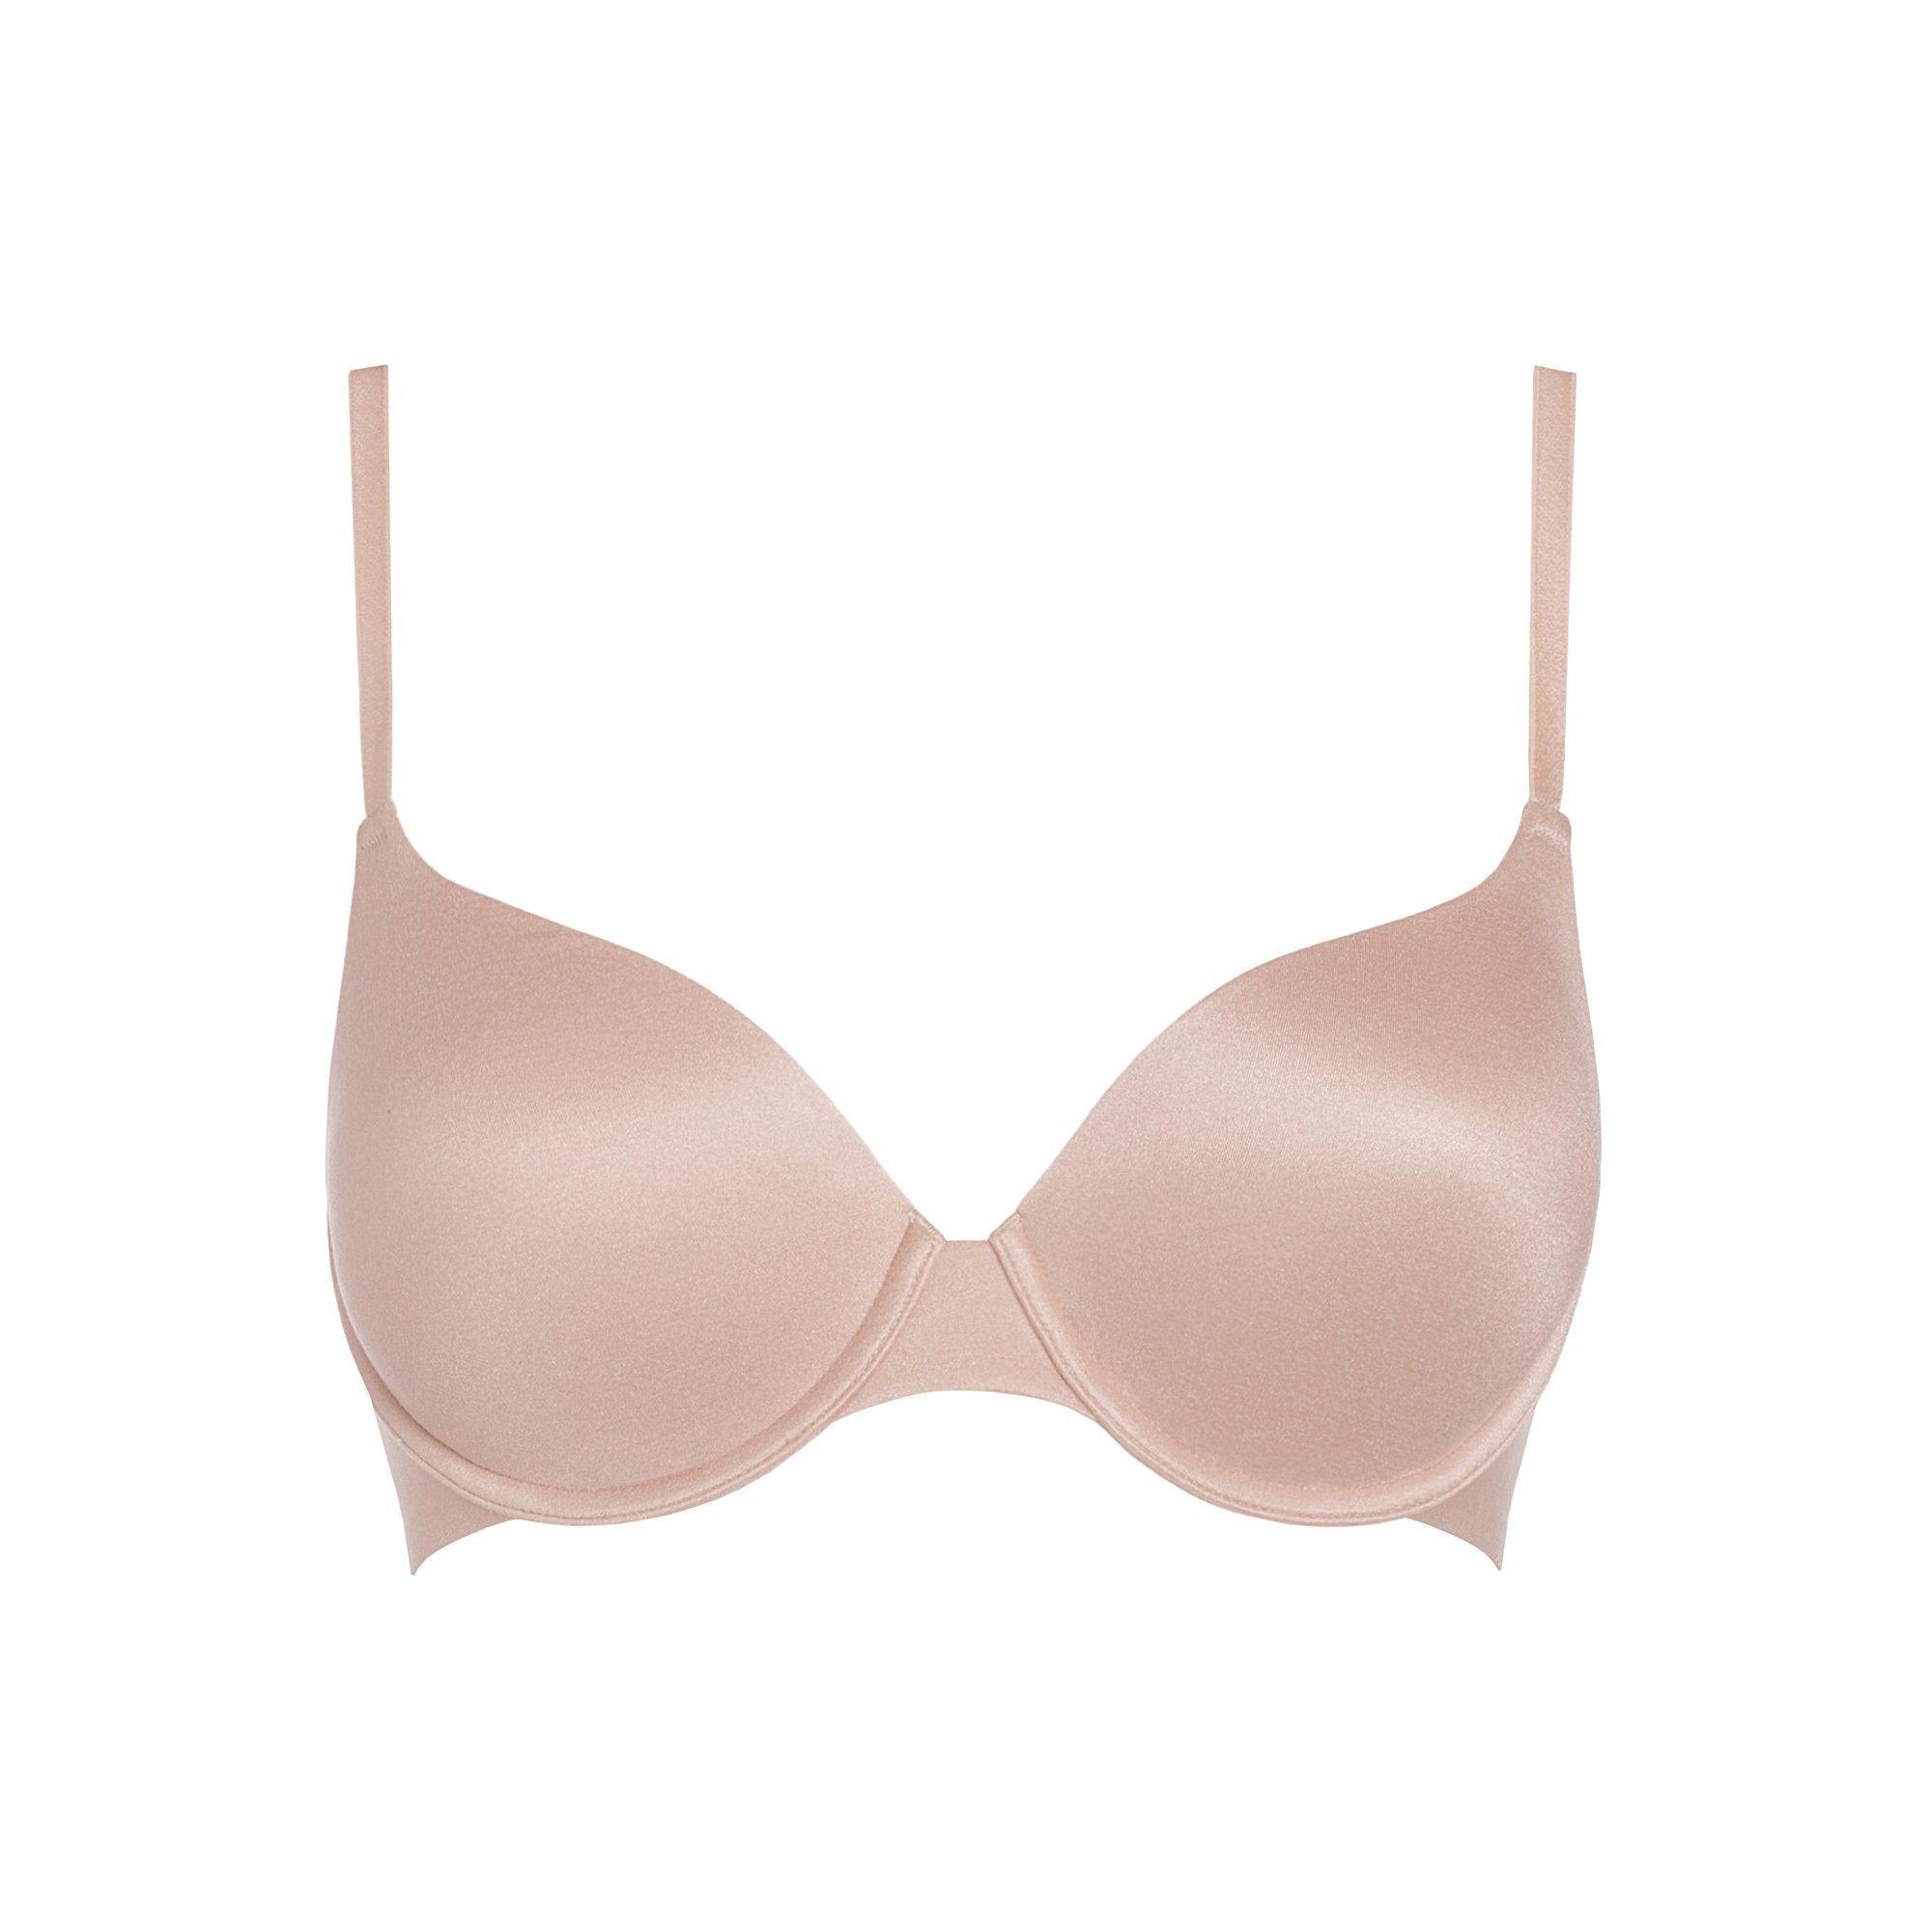 Yamamay Principessa Padded bandeau bra in different cup sizes